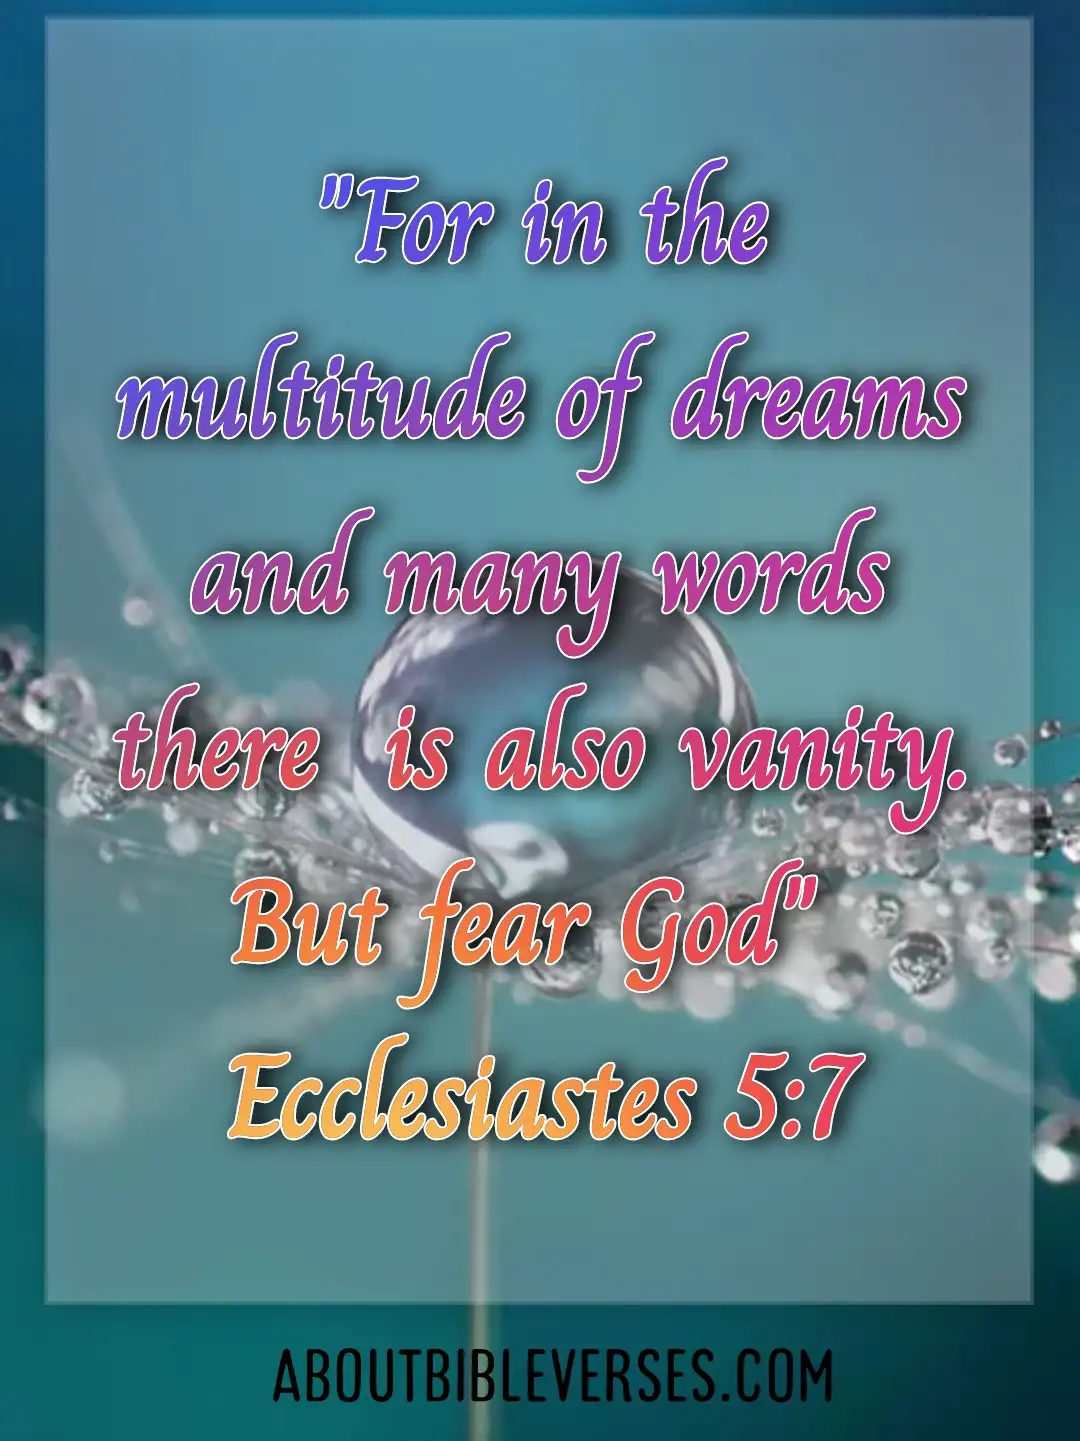 Bible Verses About Hopes And Dreams (Ecclesiastes 5:7)